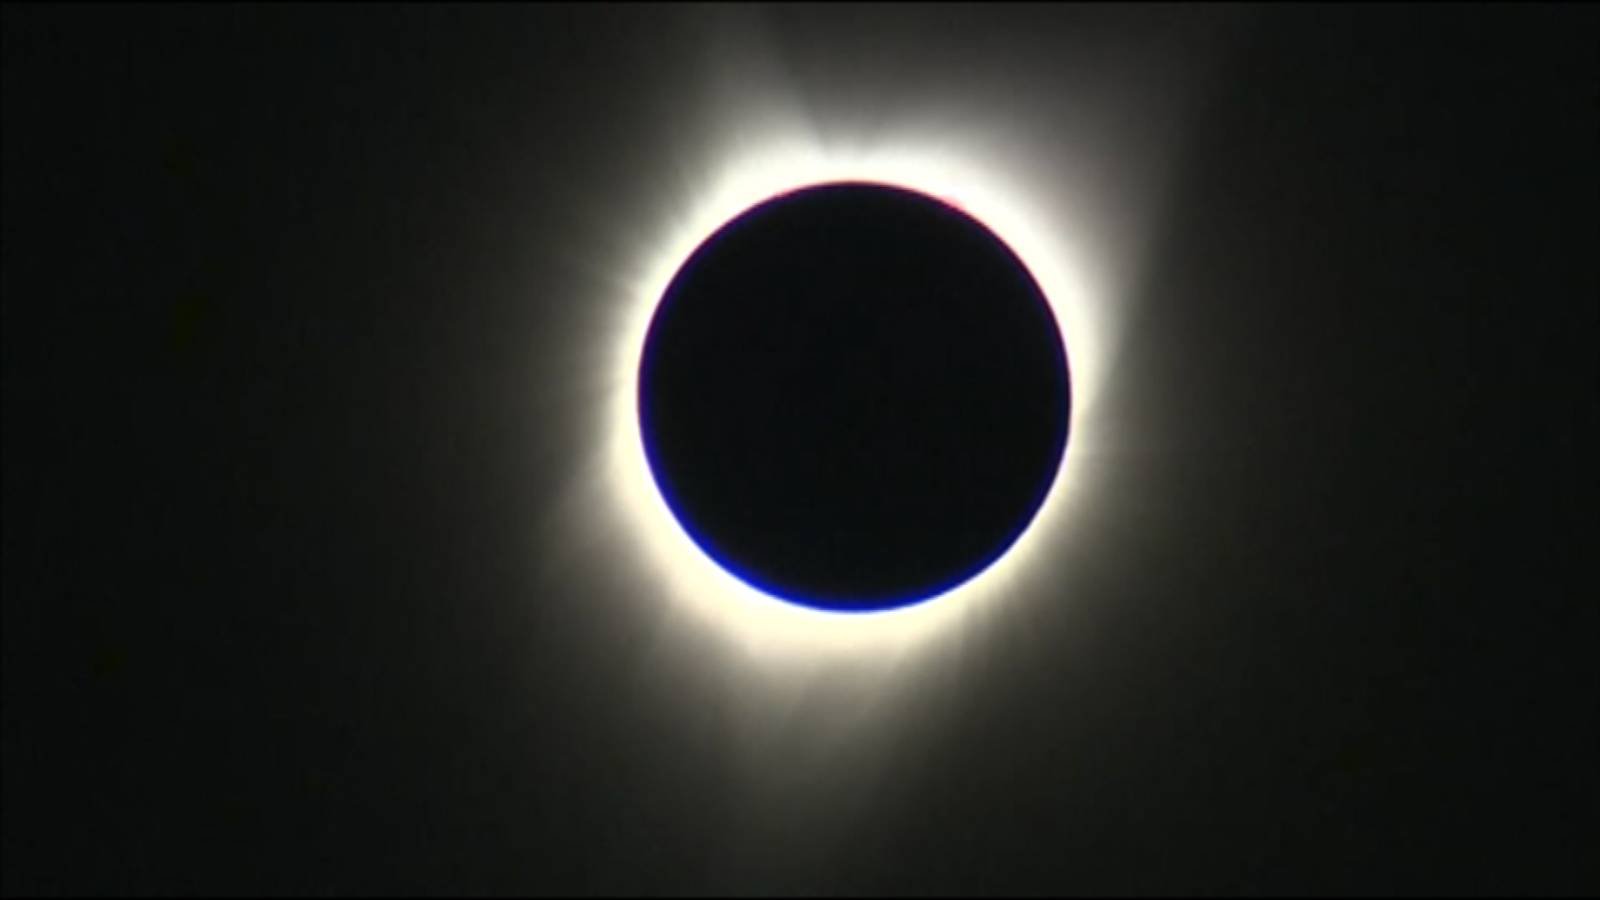 Be Careful Not To Damage Camera Gear During Solar Eclipse K95.5 Tulsa